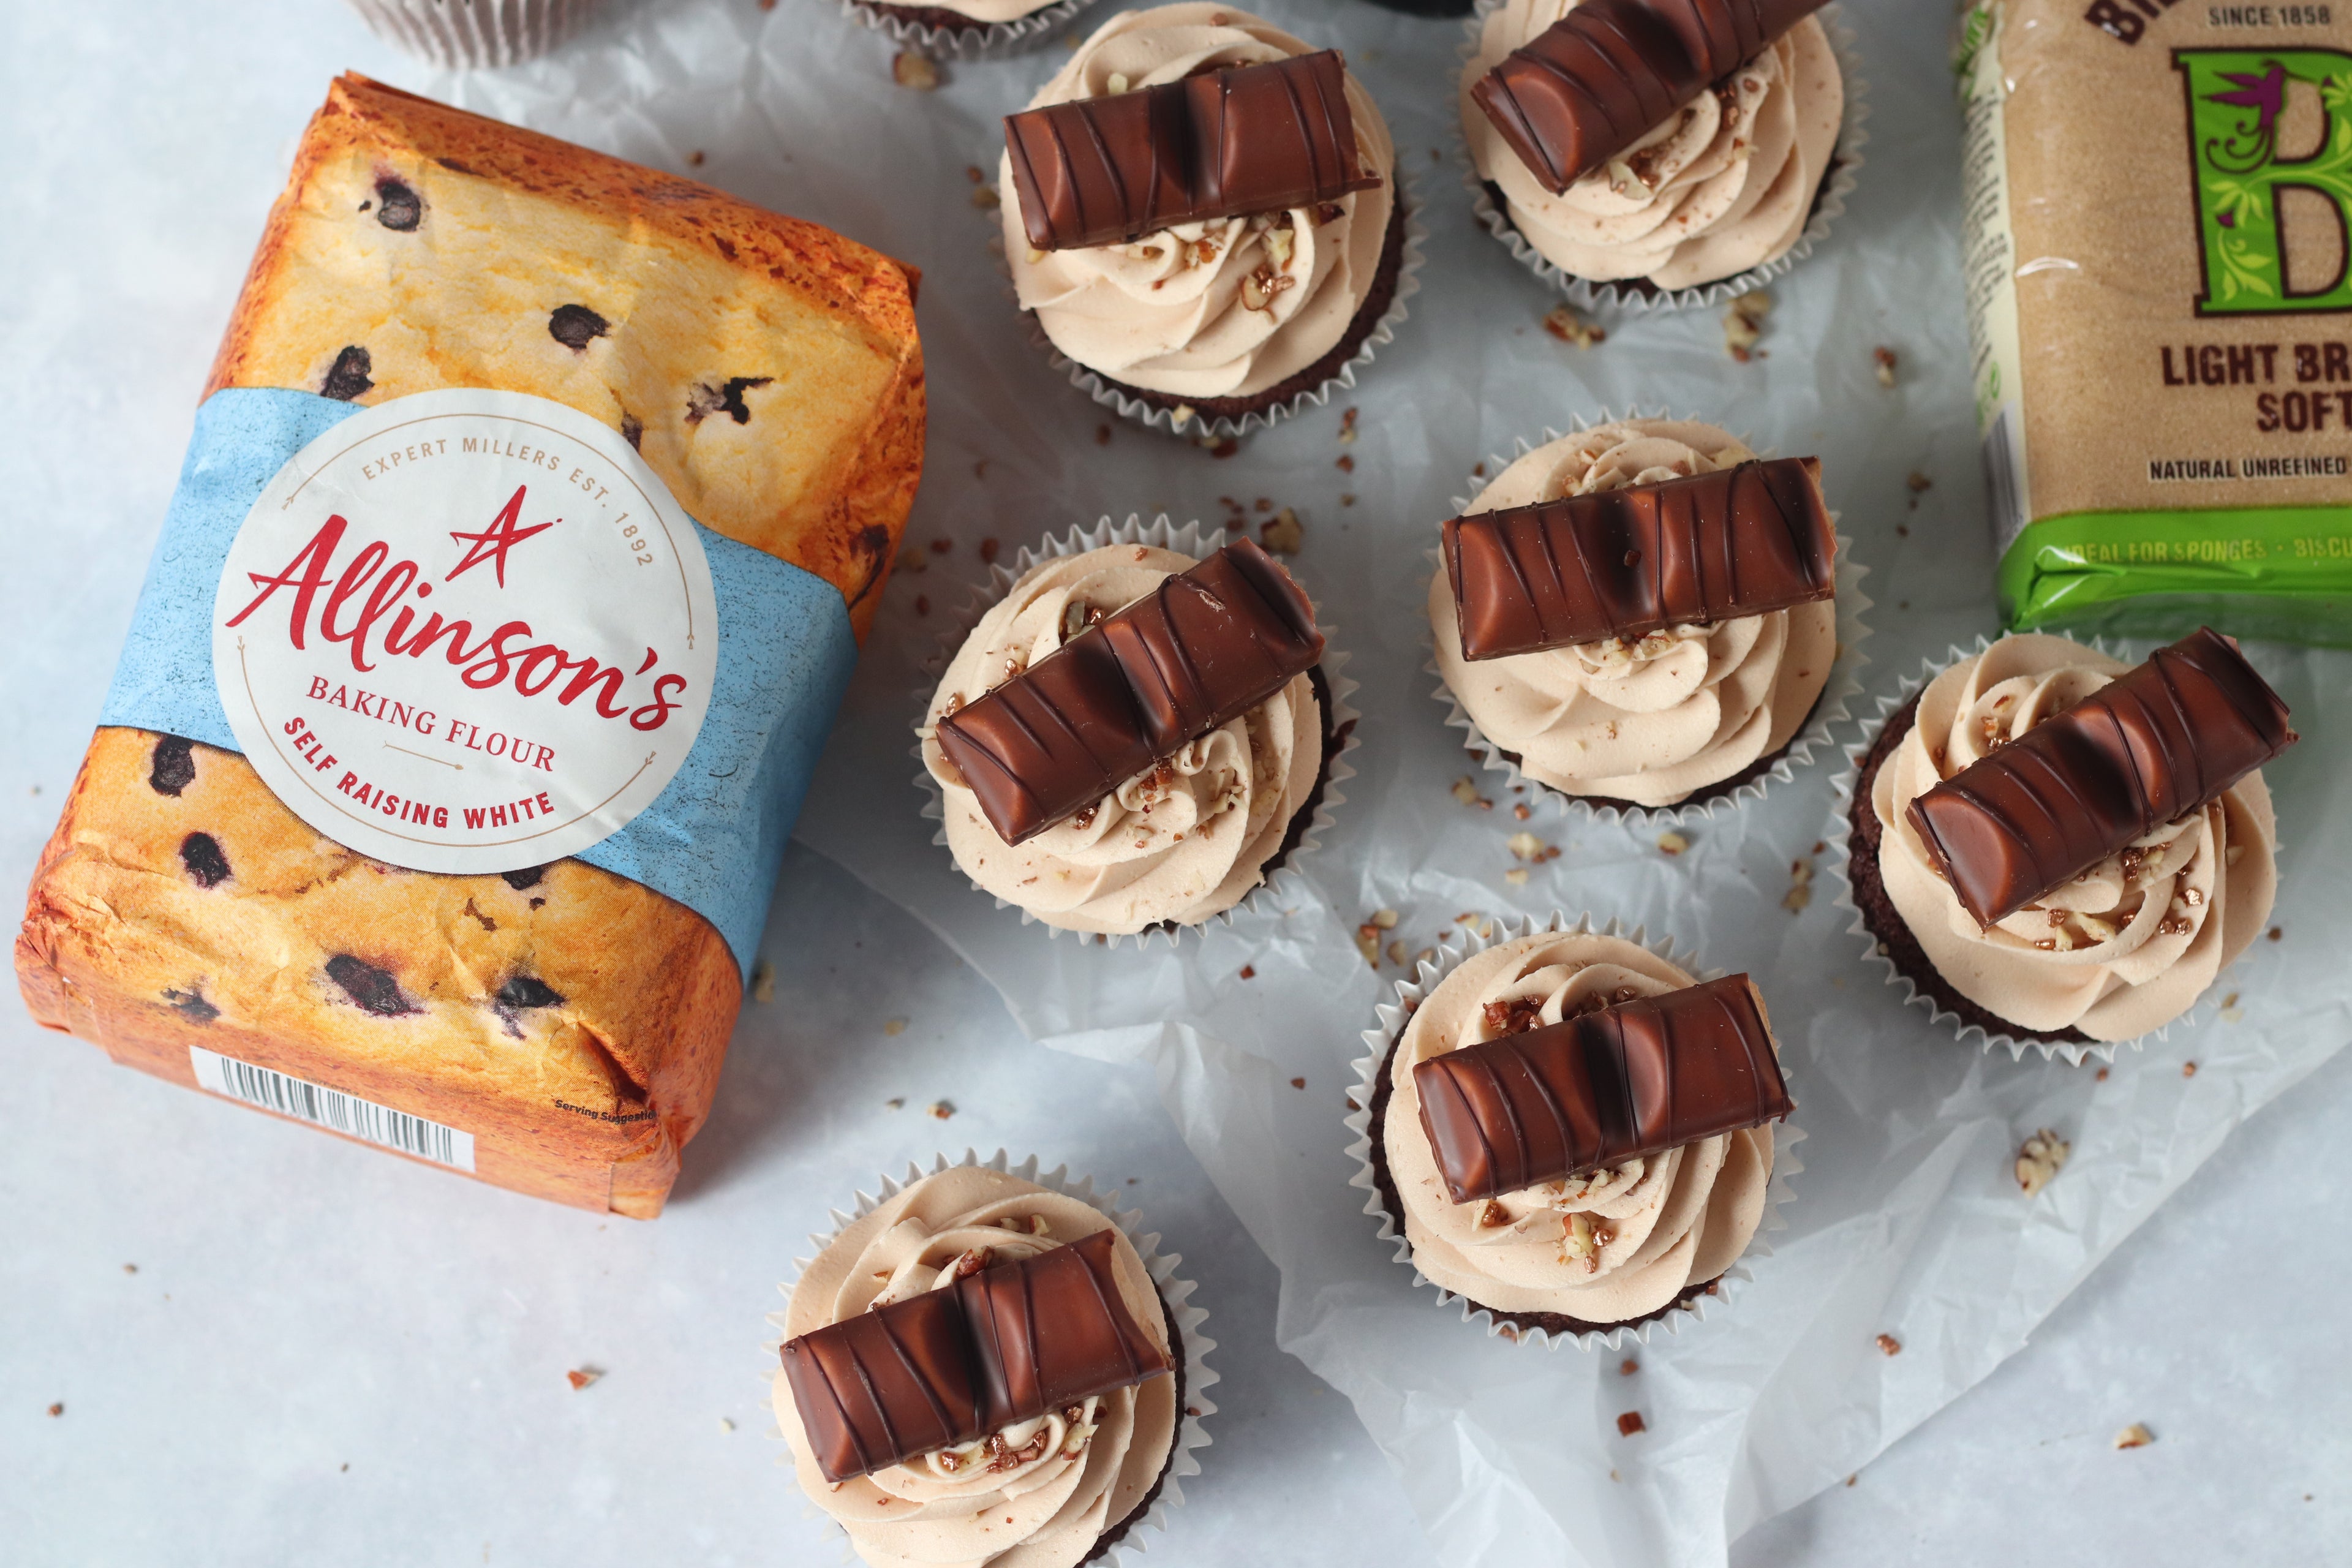 Overhead shot of 7 kinder bueno cupcakes with flour and sugar pack